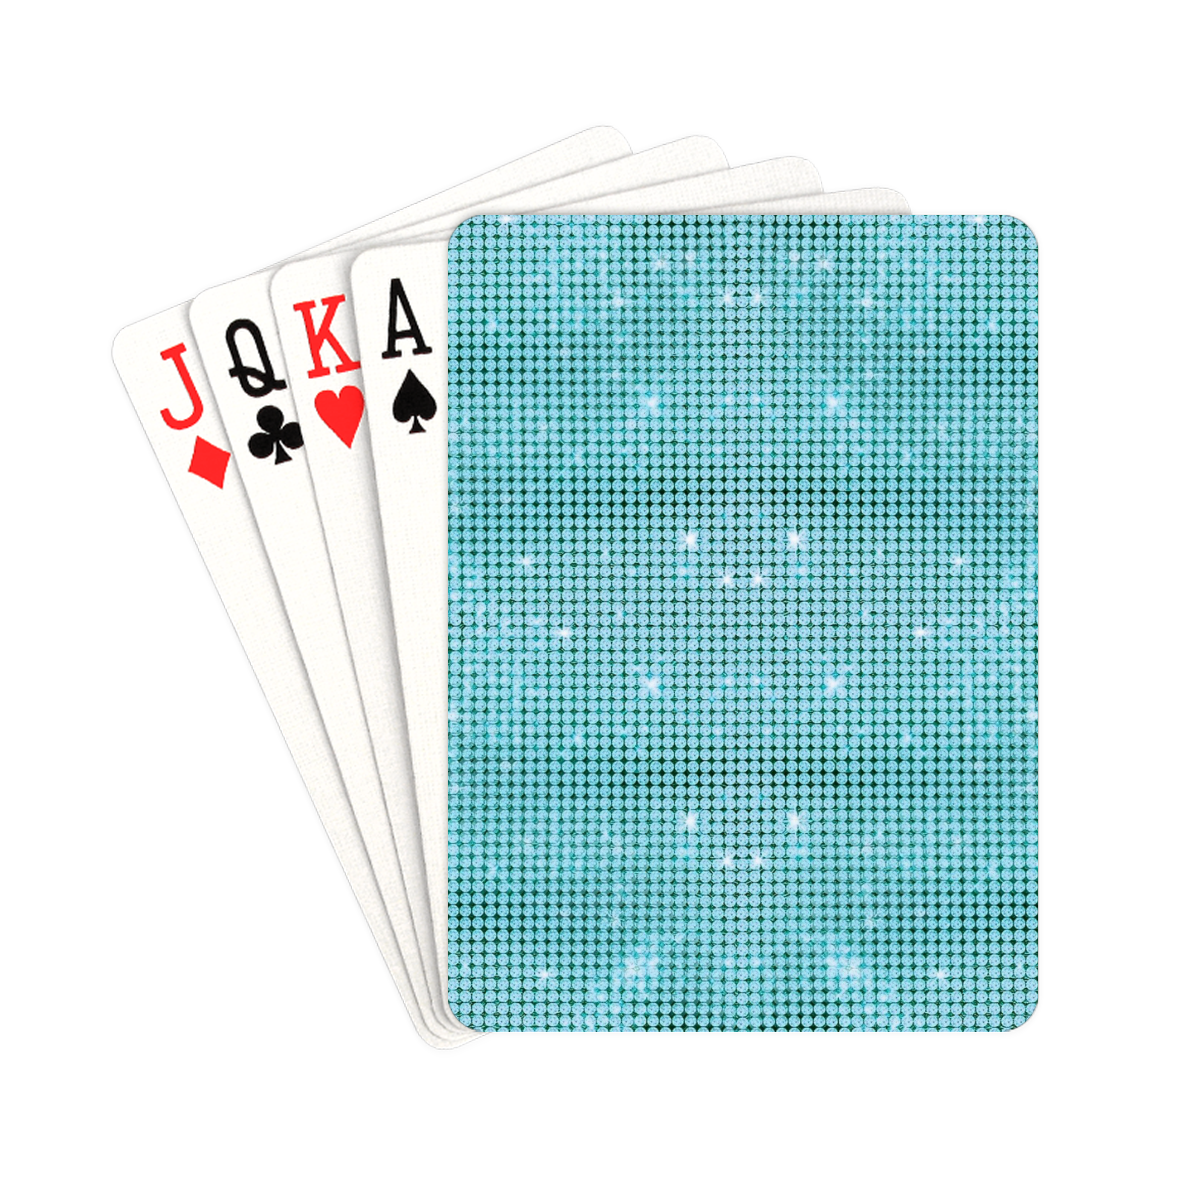 Bling by Artdream Playing Cards 2.5"x3.5"